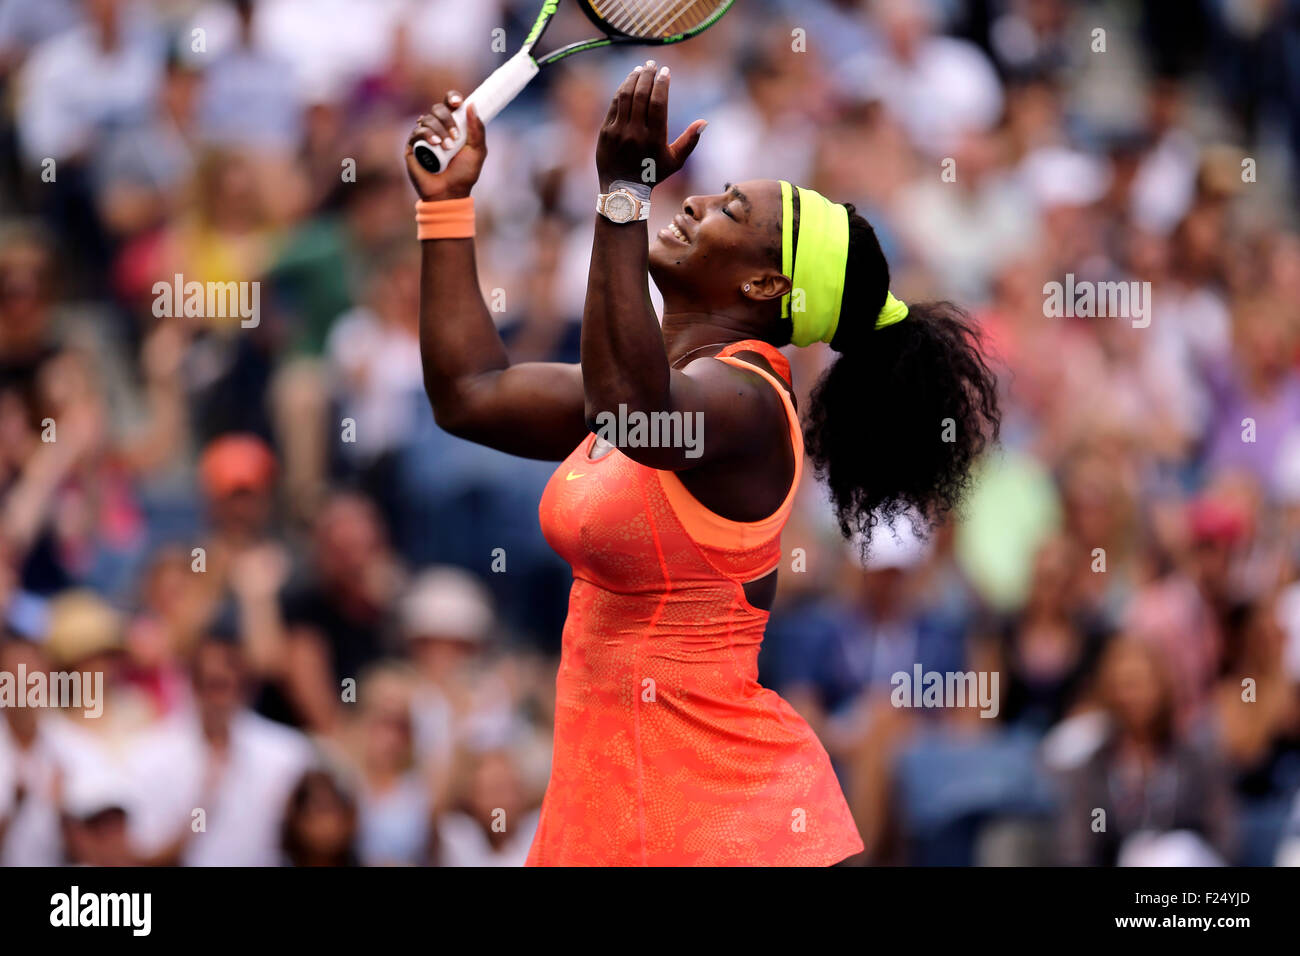 Flushing Meadows, New York, USA. 11th Sep, 2015. Serena Williams reacts to a point against Roberta Vinci of Italy in their semifinal match at the U.S. Open in Flushing Meadows, New York on the afternoon of September 11th, 2015.  Vinci won the match 2-6, 6-4, 6-4, thwarting Williams bid for a Grand Slam. Credit:  Adam Stoltman/Alamy Live News Stock Photo